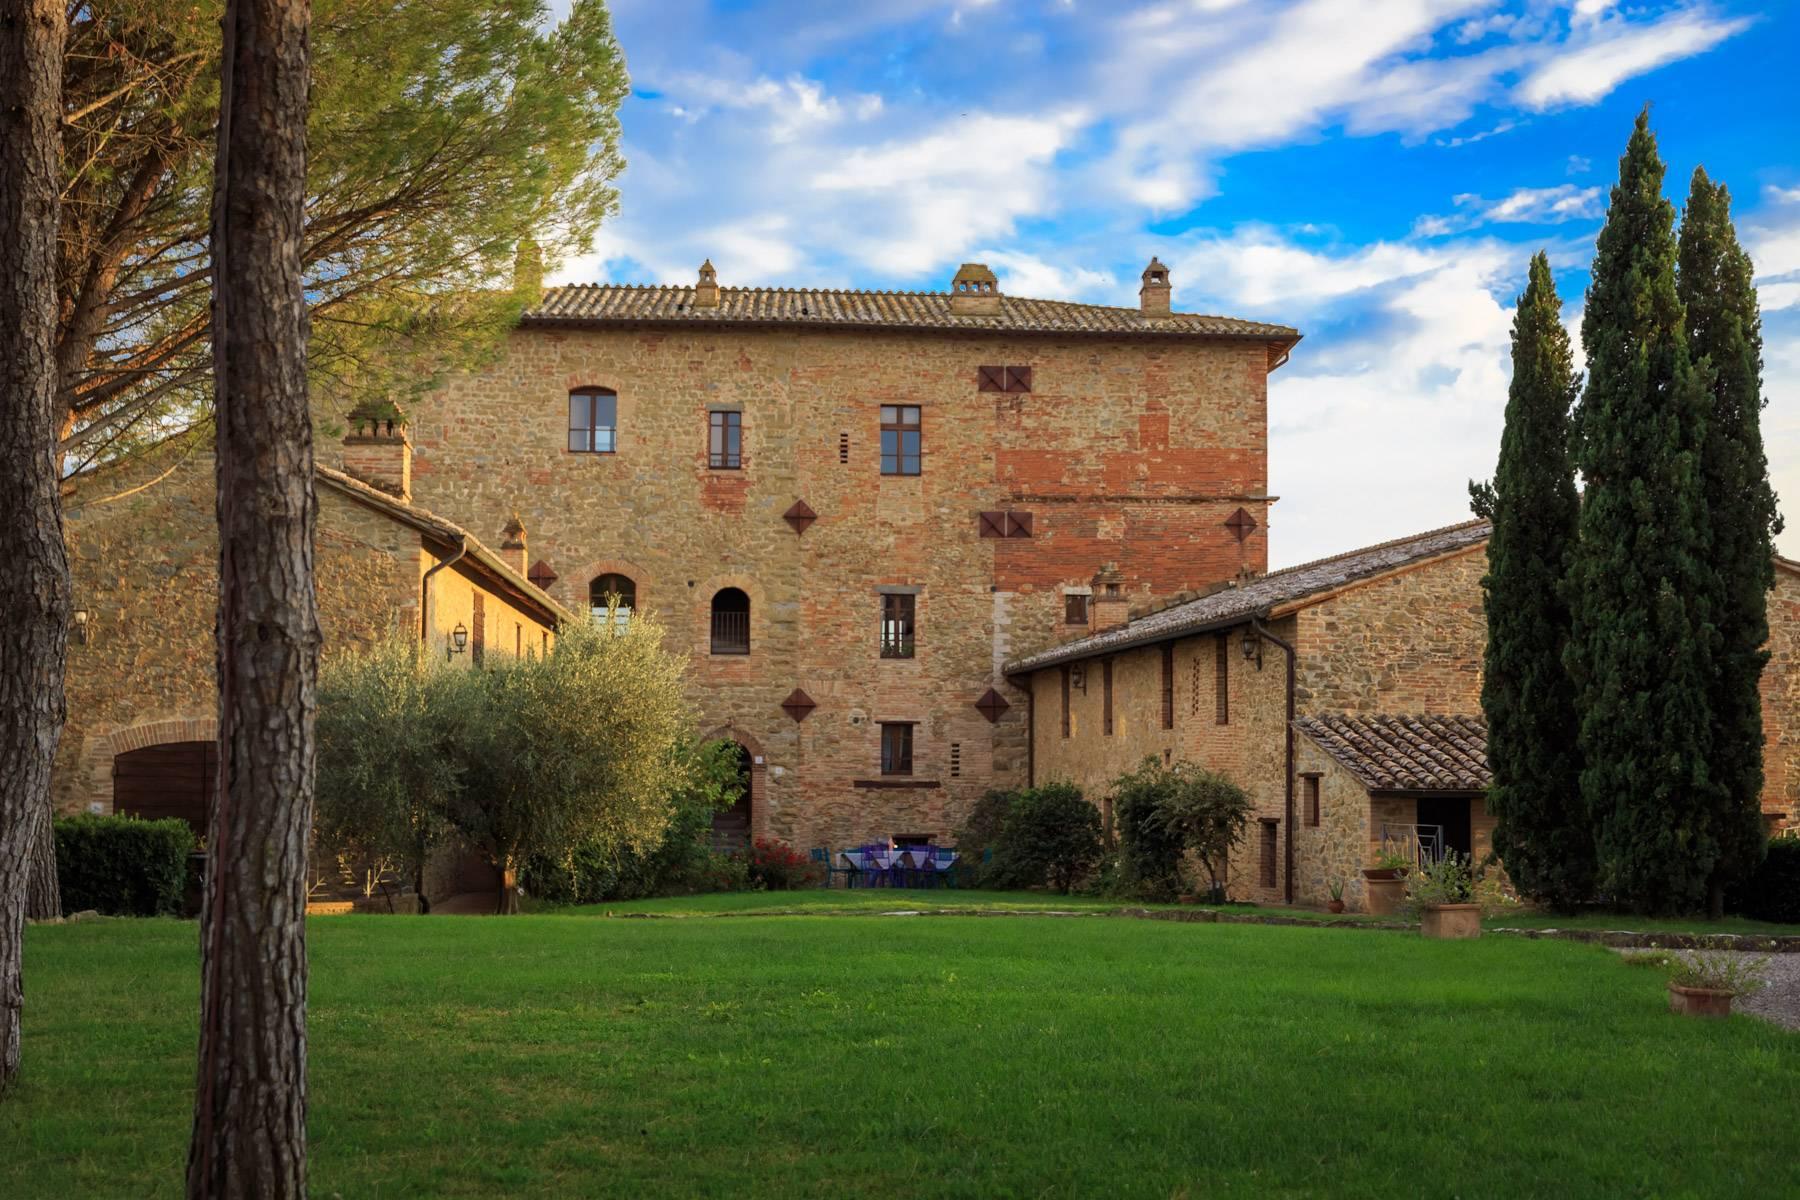 Magnificent castle in the heart of Umbria - 30